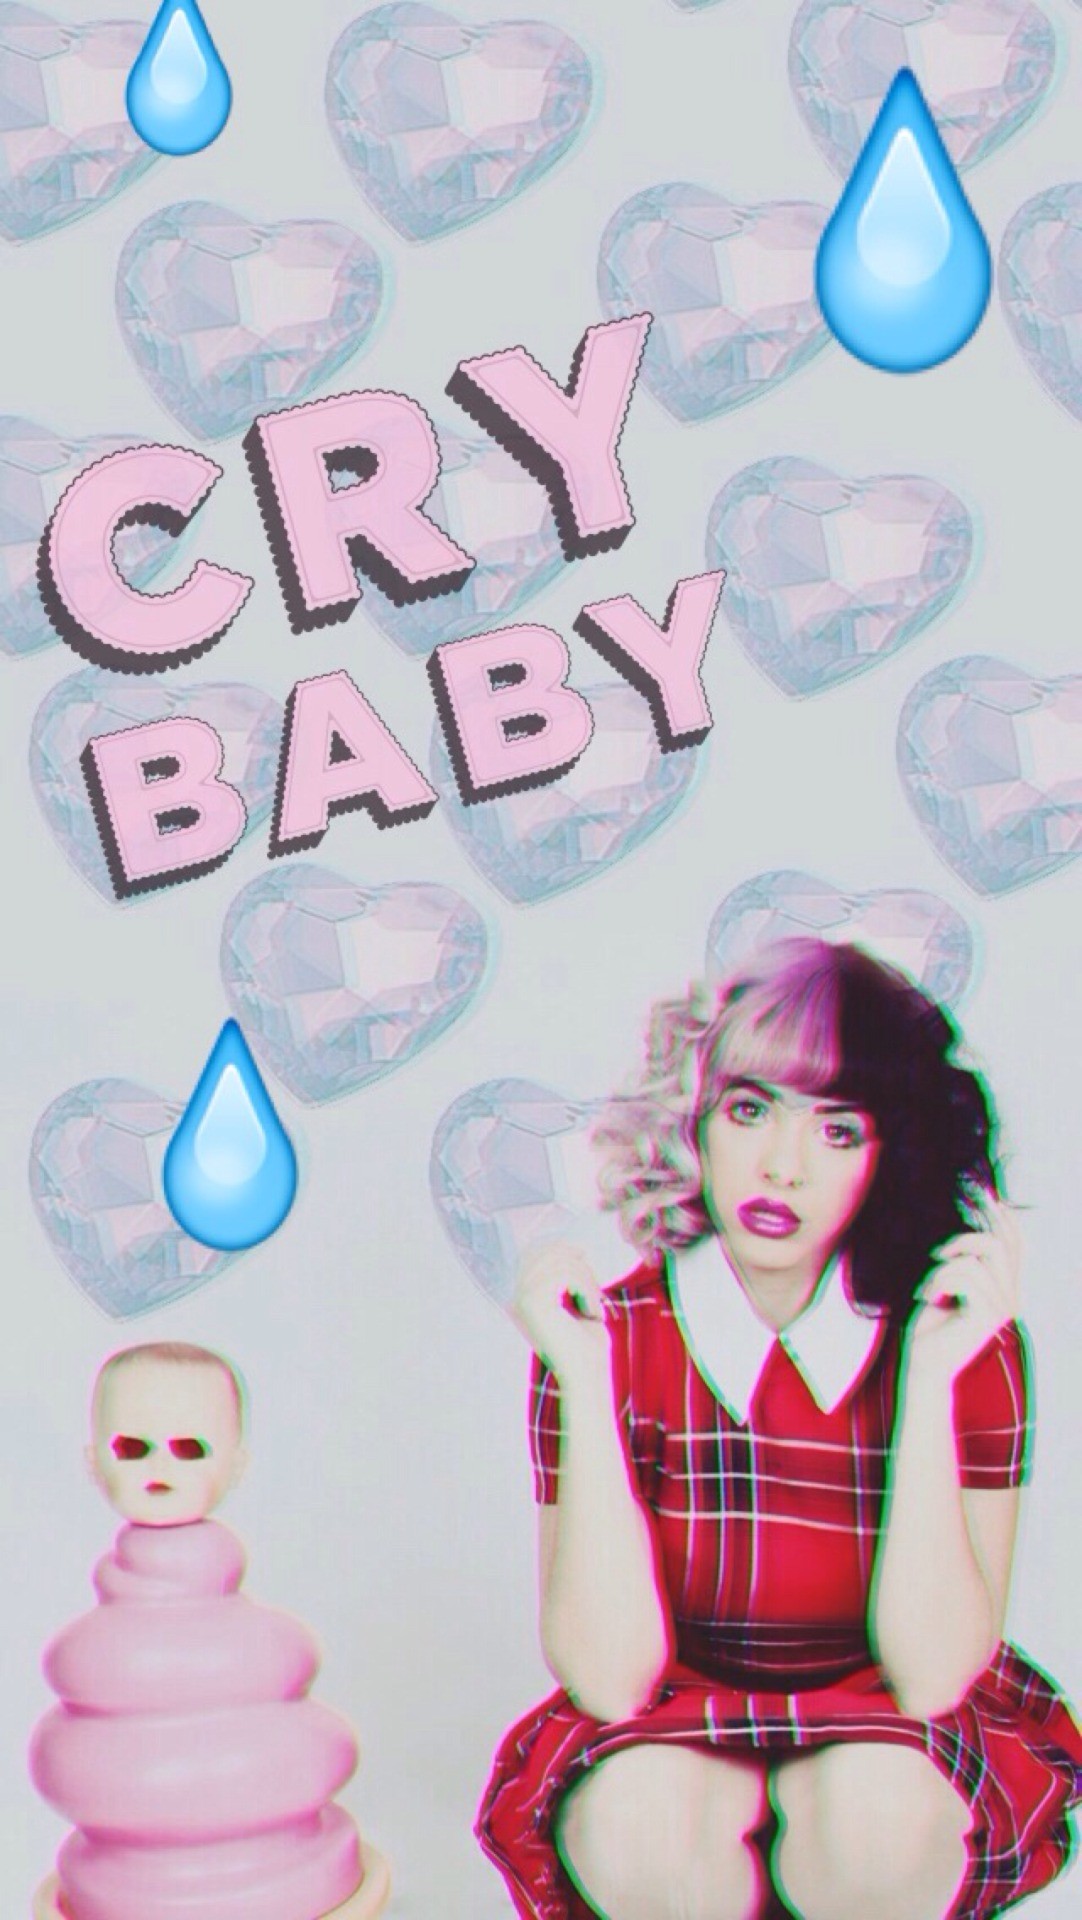 cry baby wallpaper,pink,illustration,doll,party,pattern